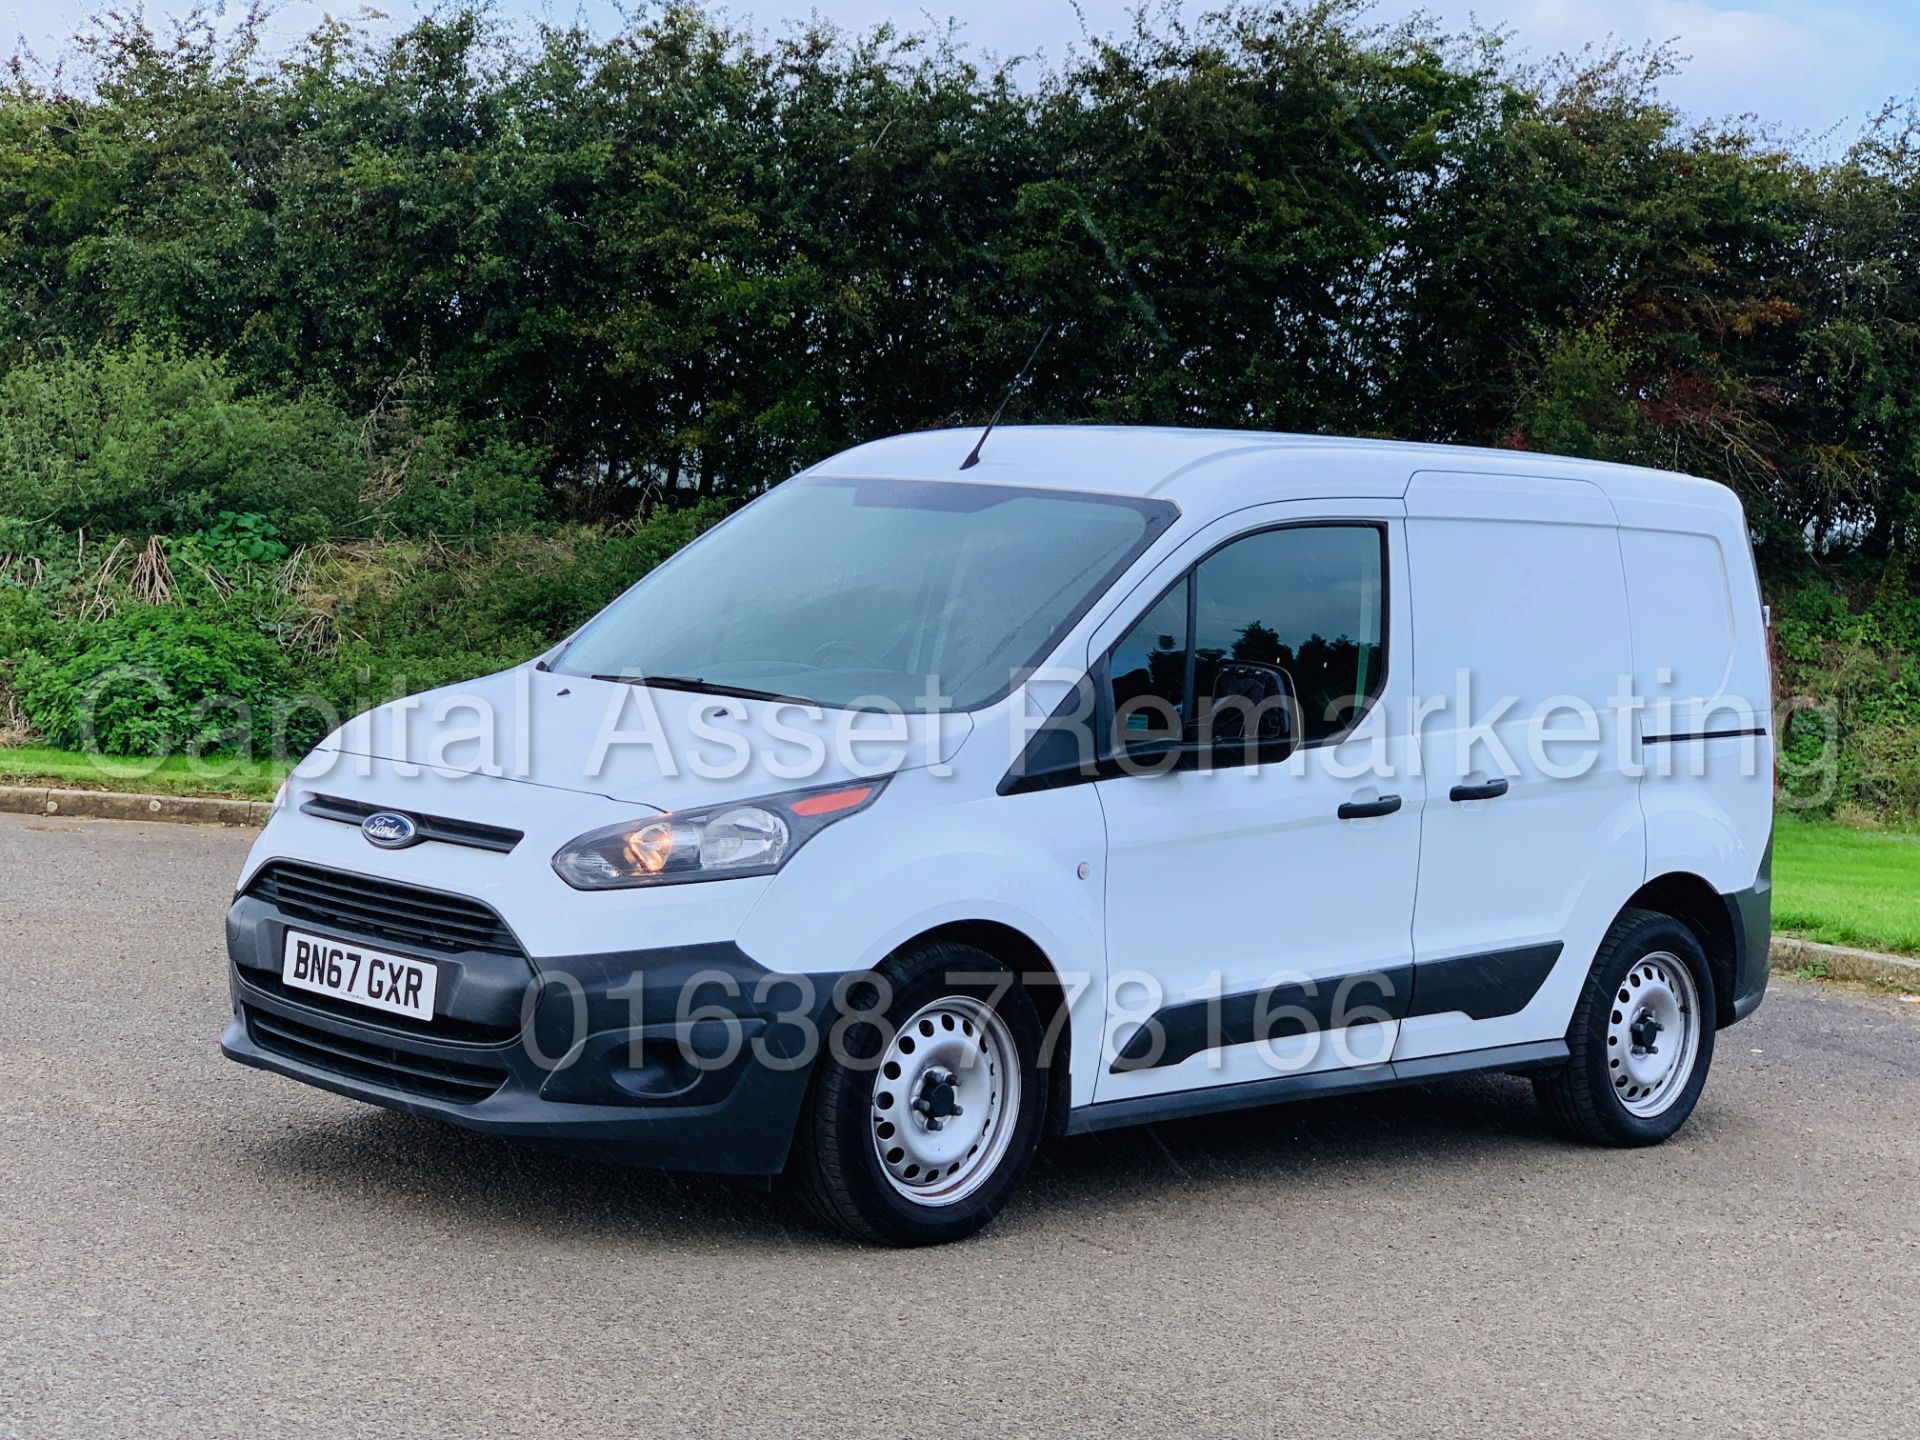 FORD TRANSIT CONNECT 75 T200 *SWB - PANEL VAN* (2018 MODEL) '1.5 TDCI - EURO 6 COMPLIANT' (1 OWNER) - Image 7 of 36